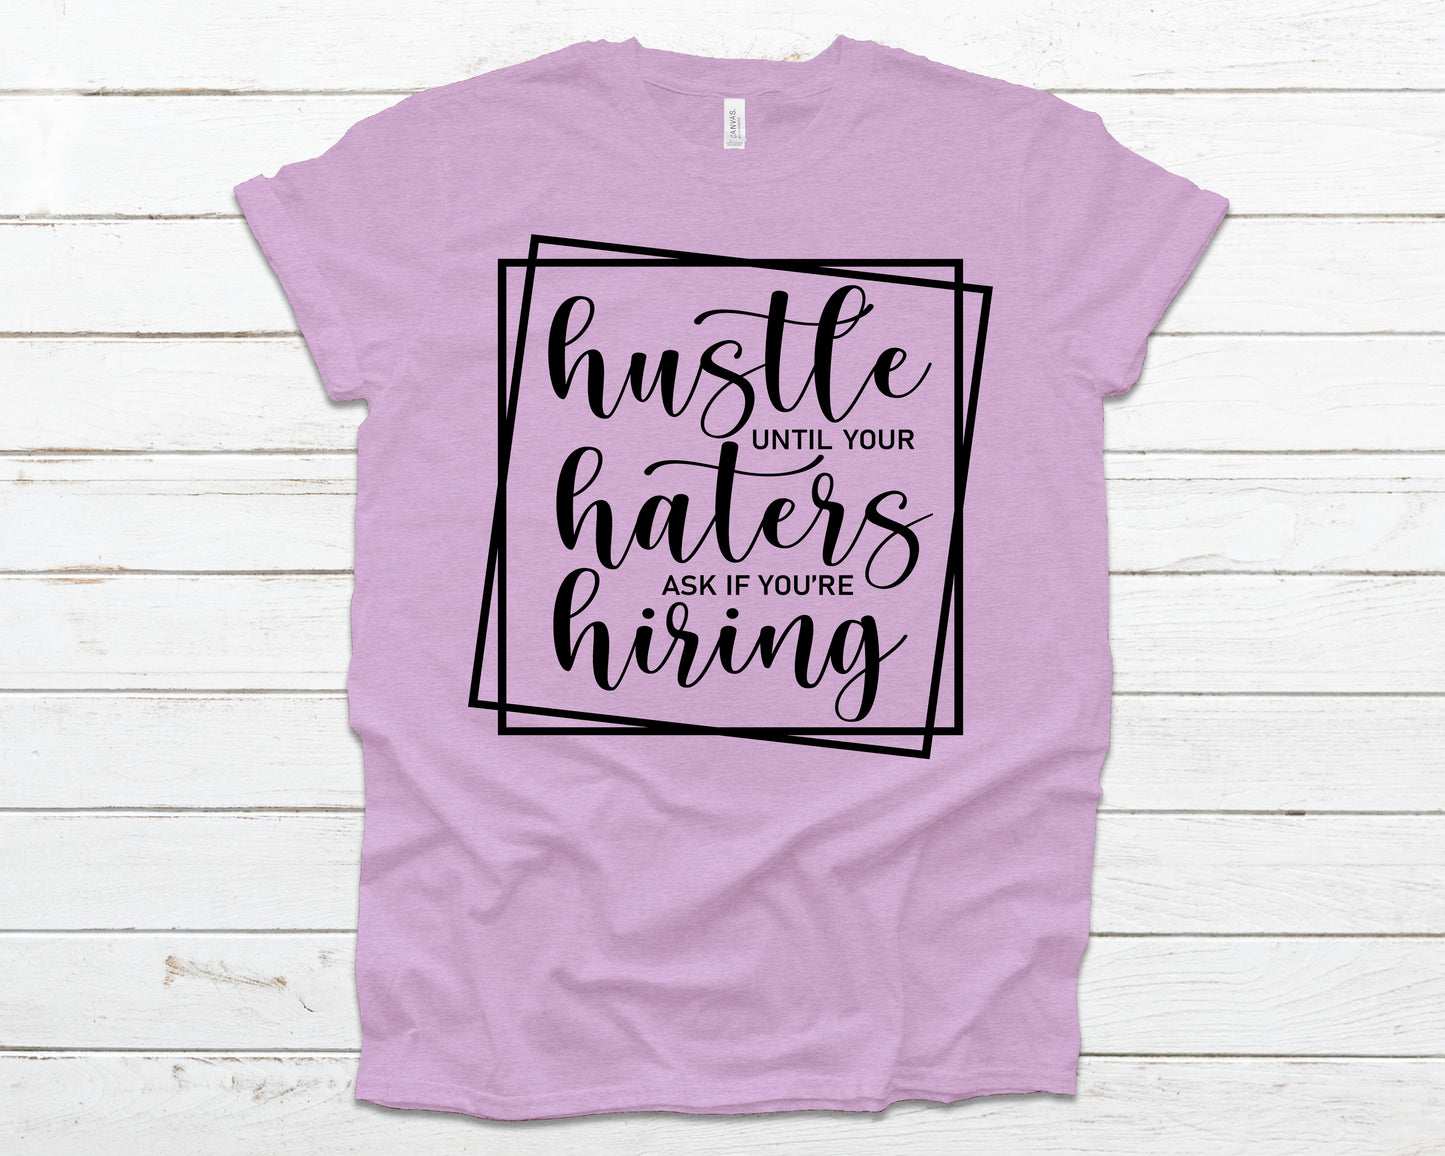 Hustle until your haters ask if you're hiring